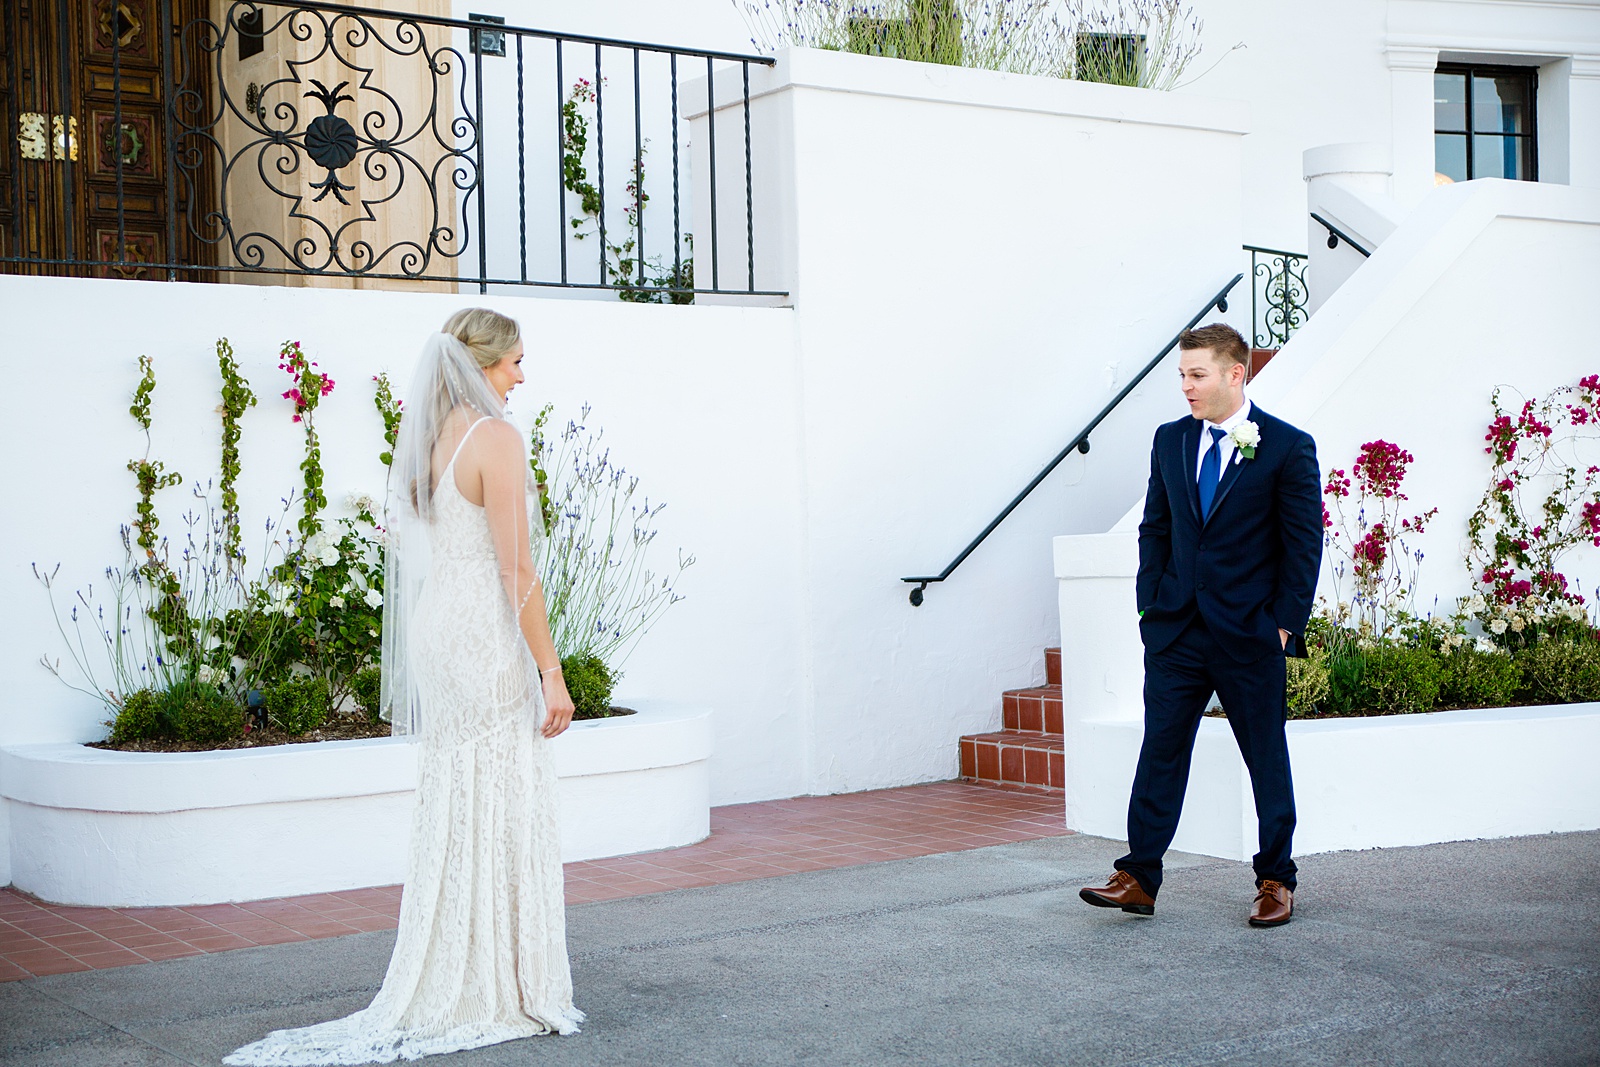 Bride and Groom's first look at Wrigley Mansion by Phoenix wedding photographer PMA Photography.